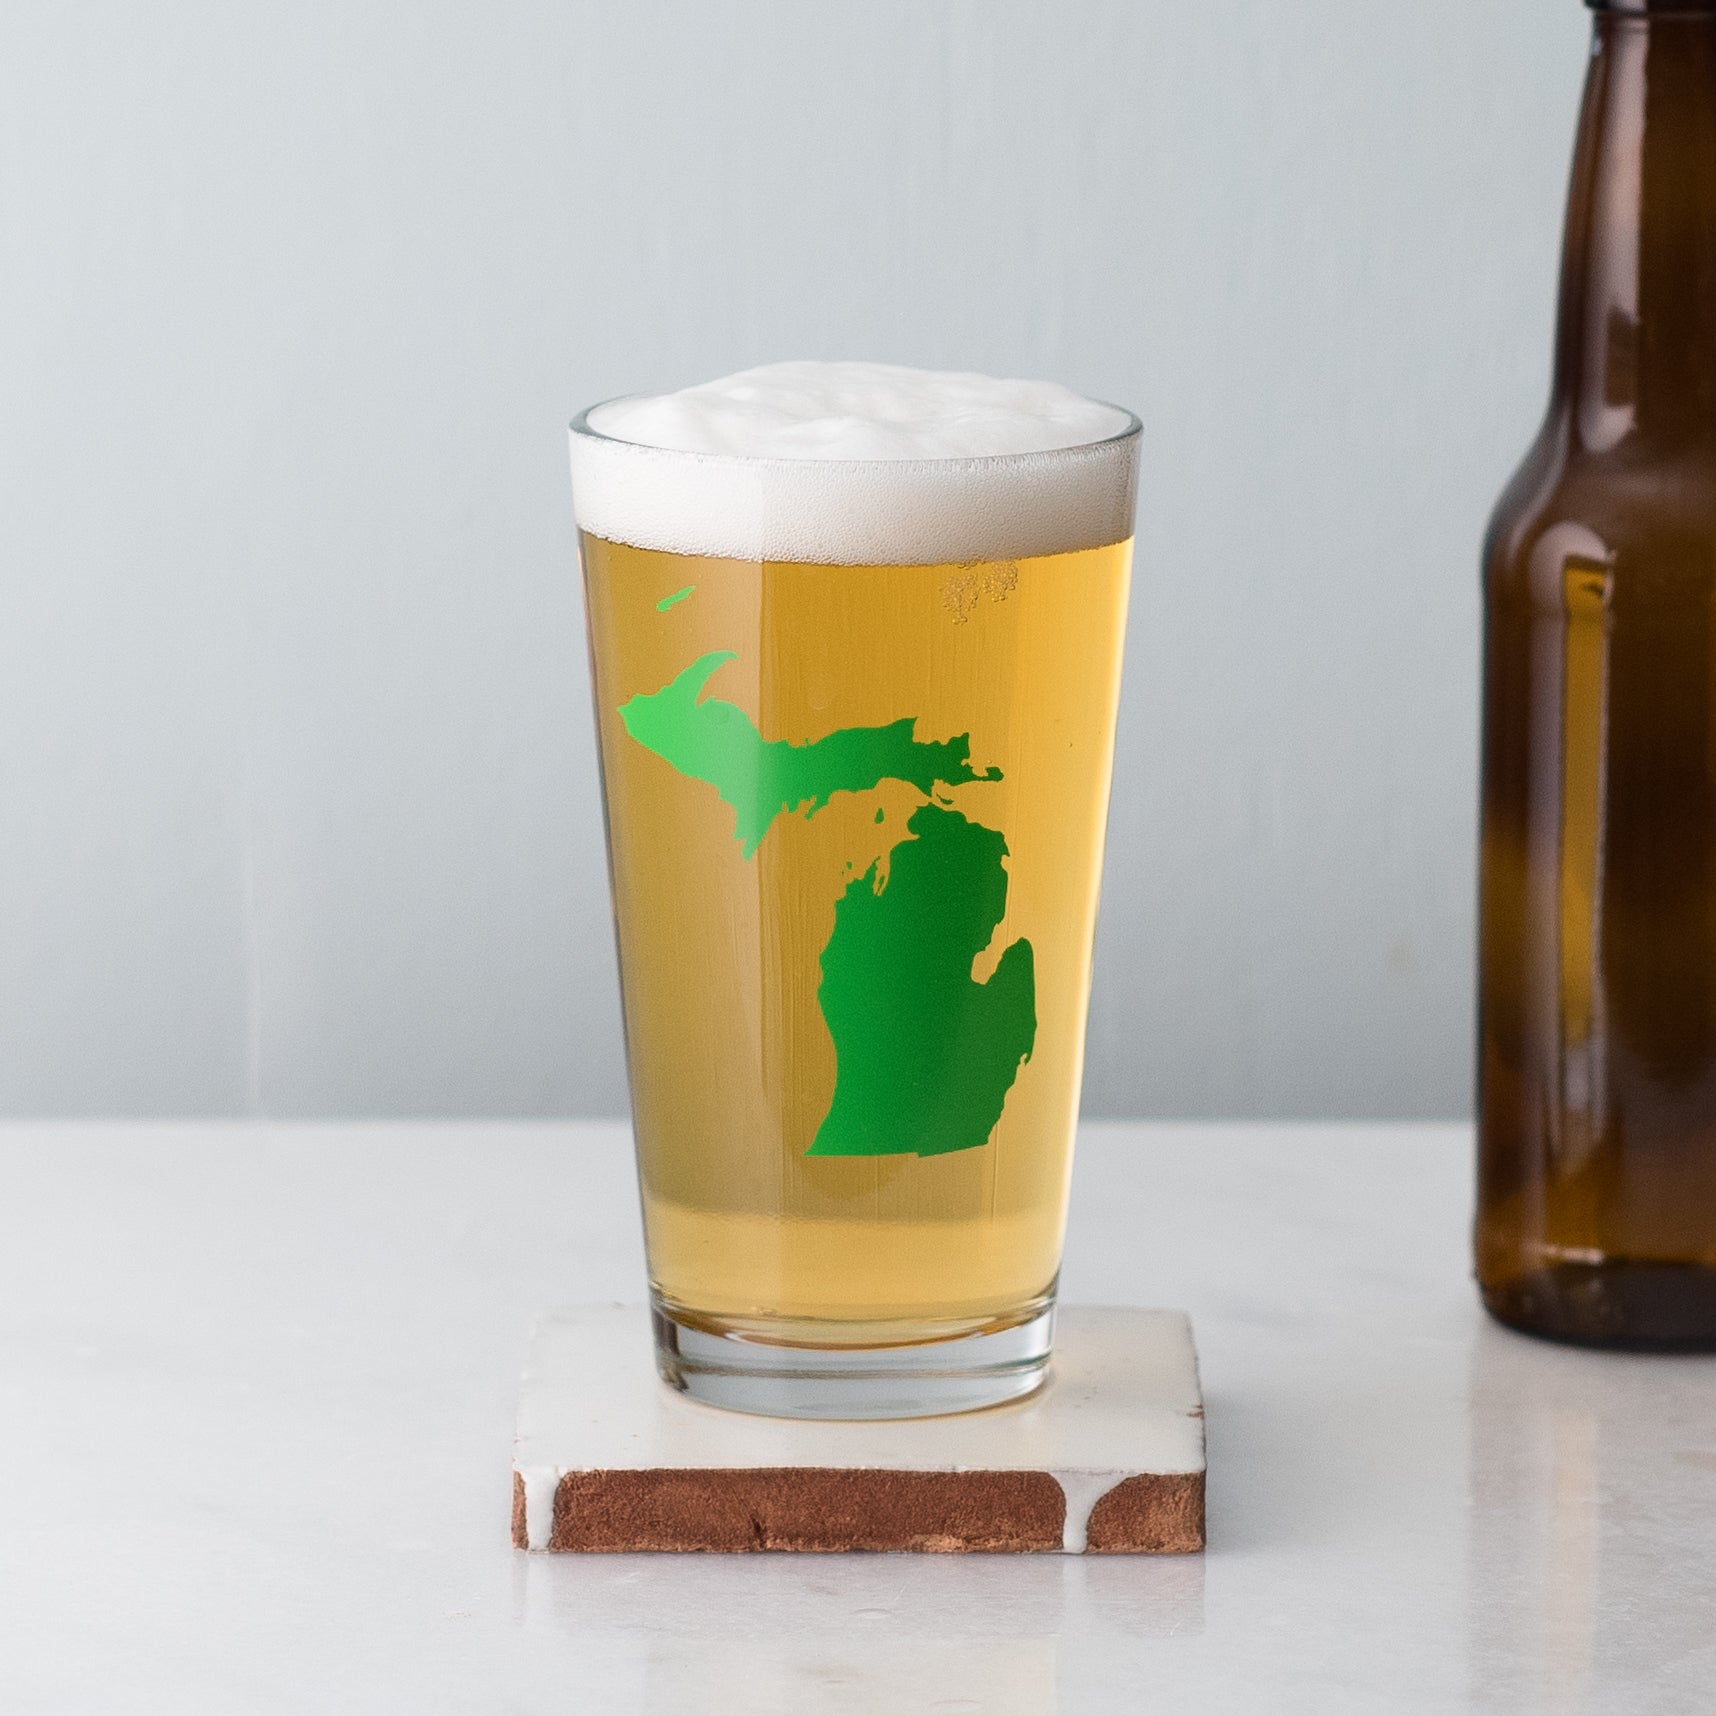 State Silhouette Pints